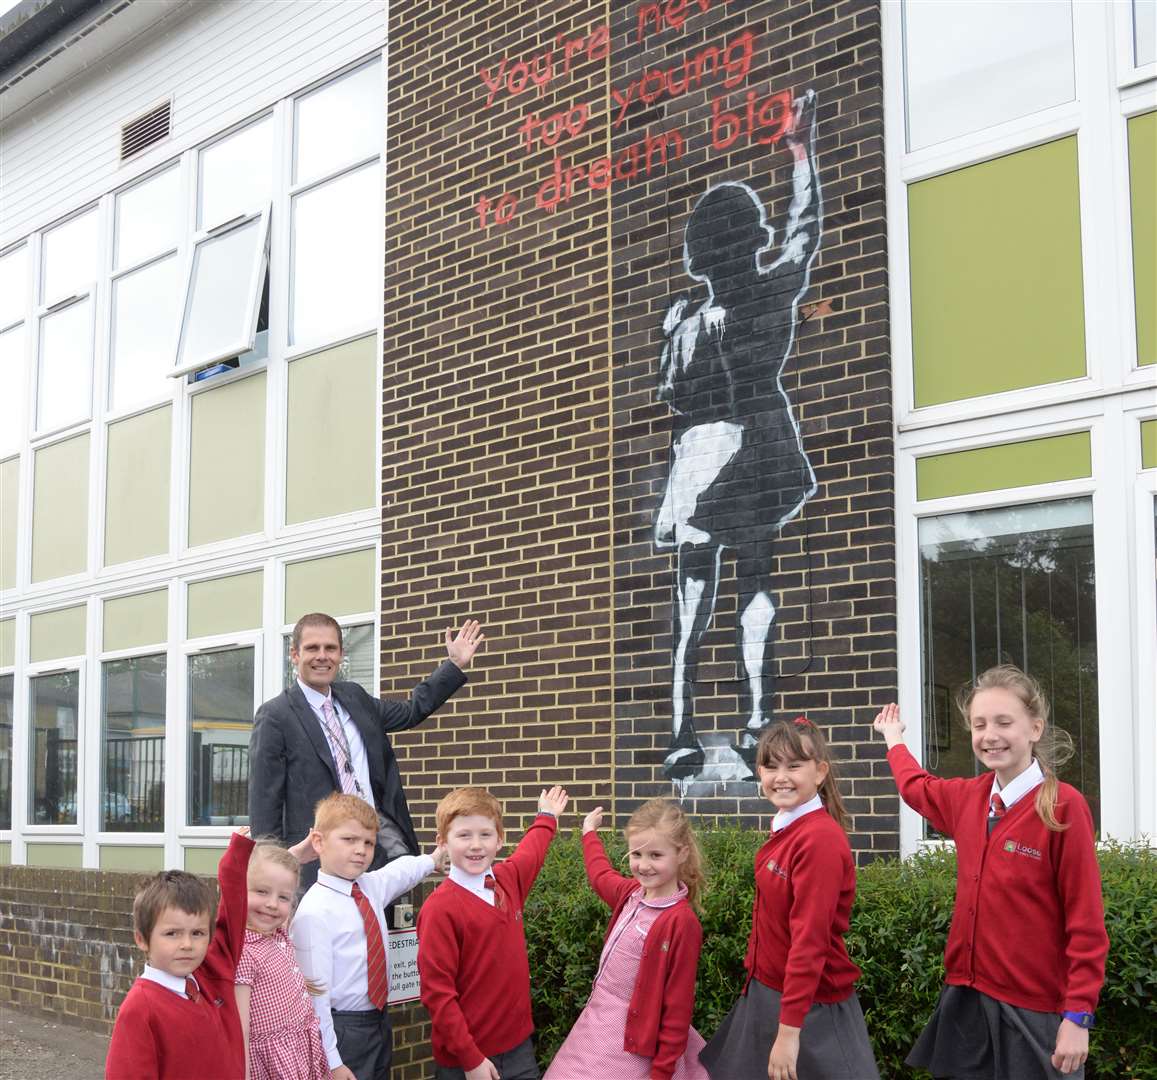 Darren Webb, Executive Head with some of his pupils and the Banksy style graffiti at Loose Primary School on Wednesday. Picture: Chris Davey. (9080206)